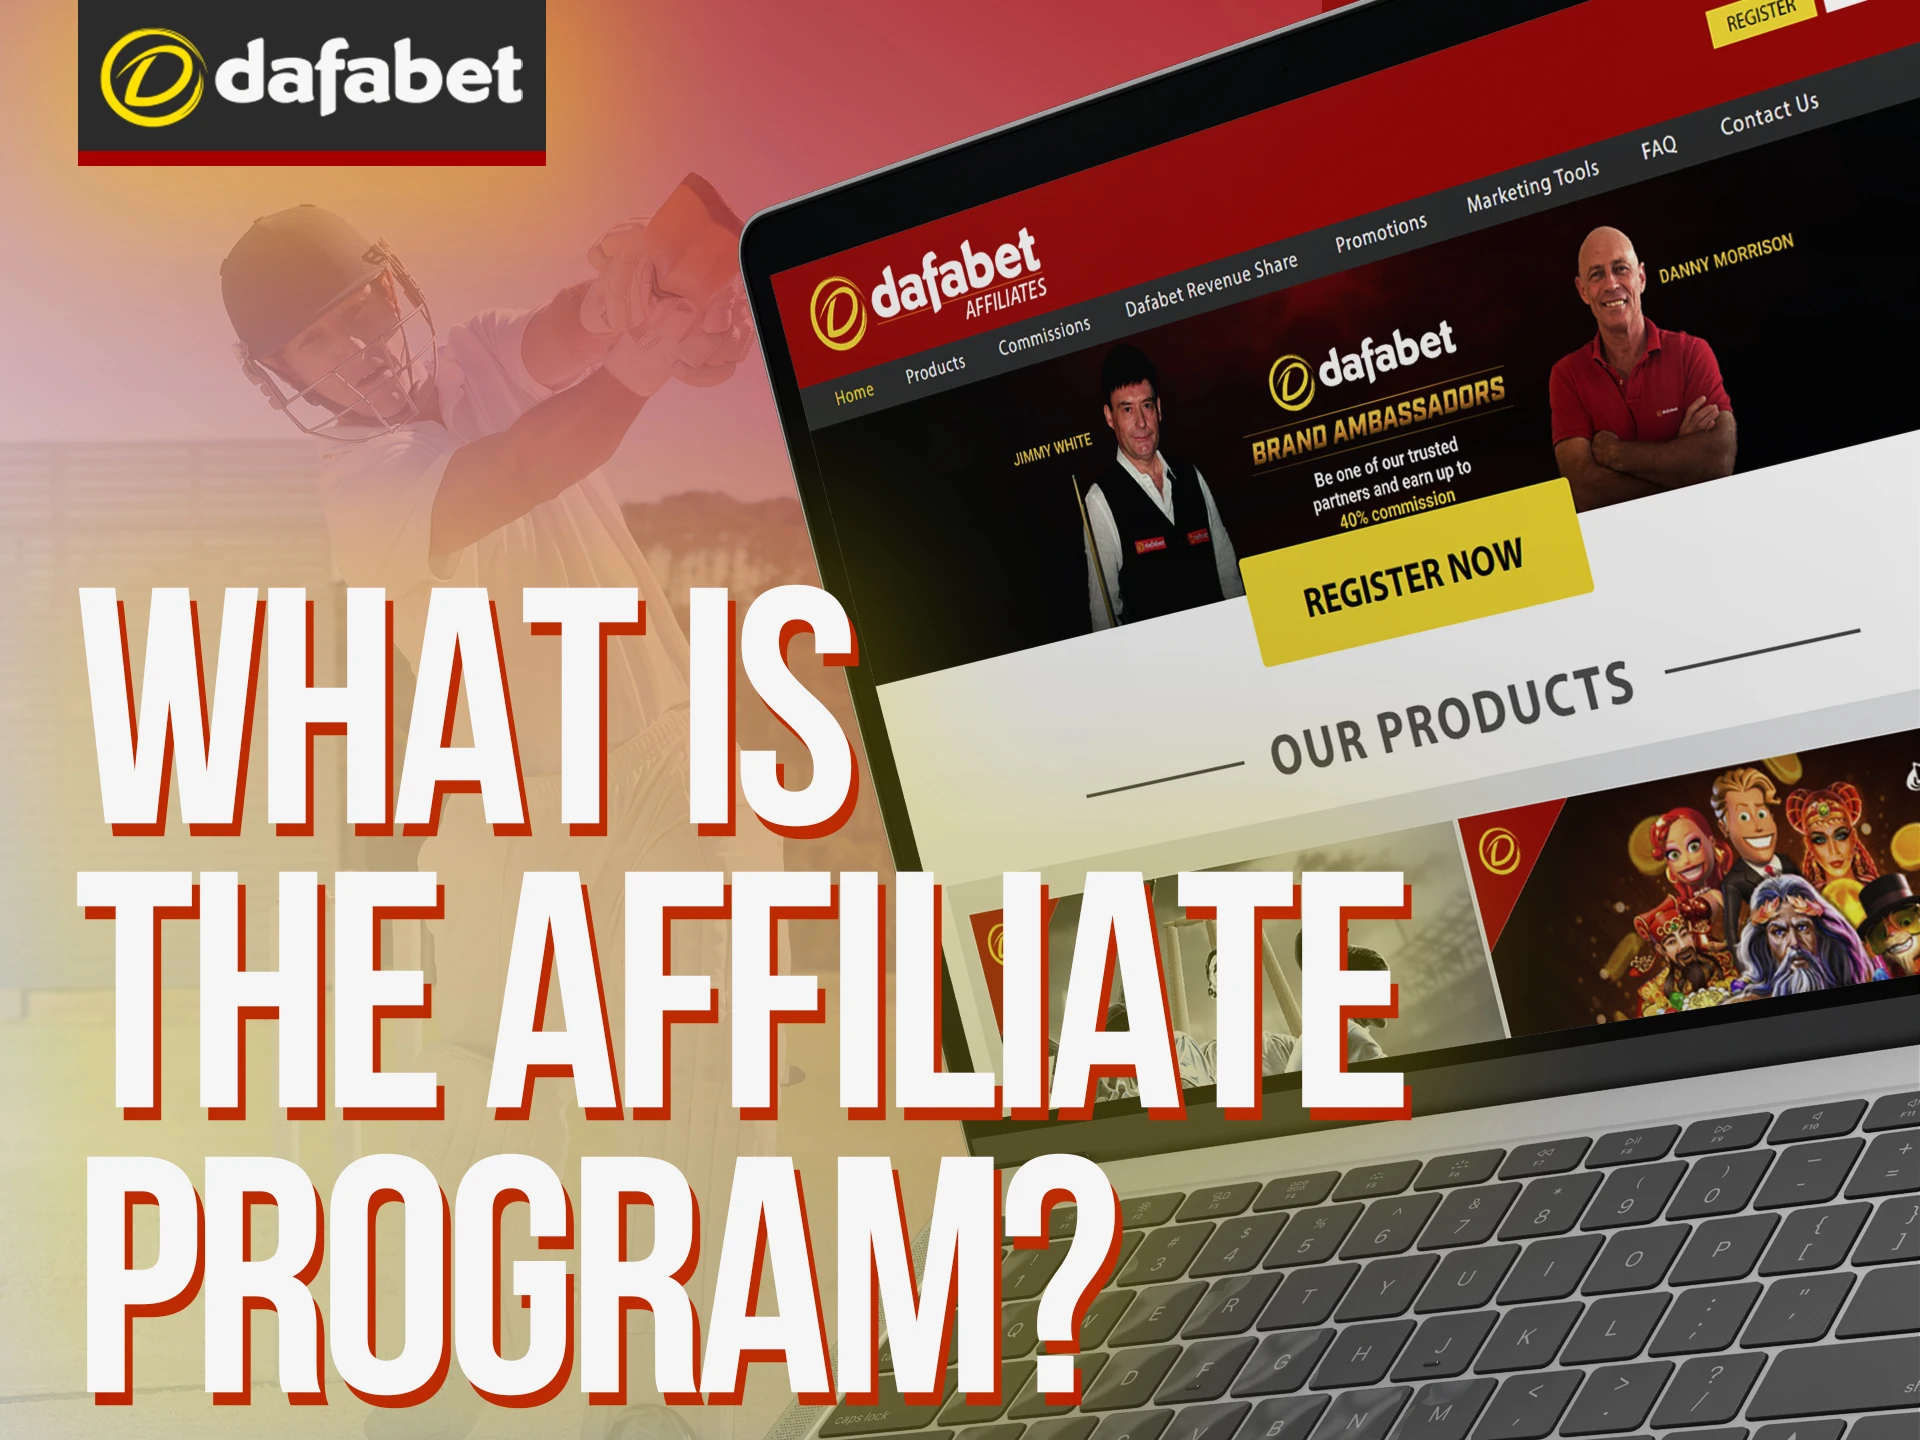 Dafabet affiliate program allows you to invite your friends.